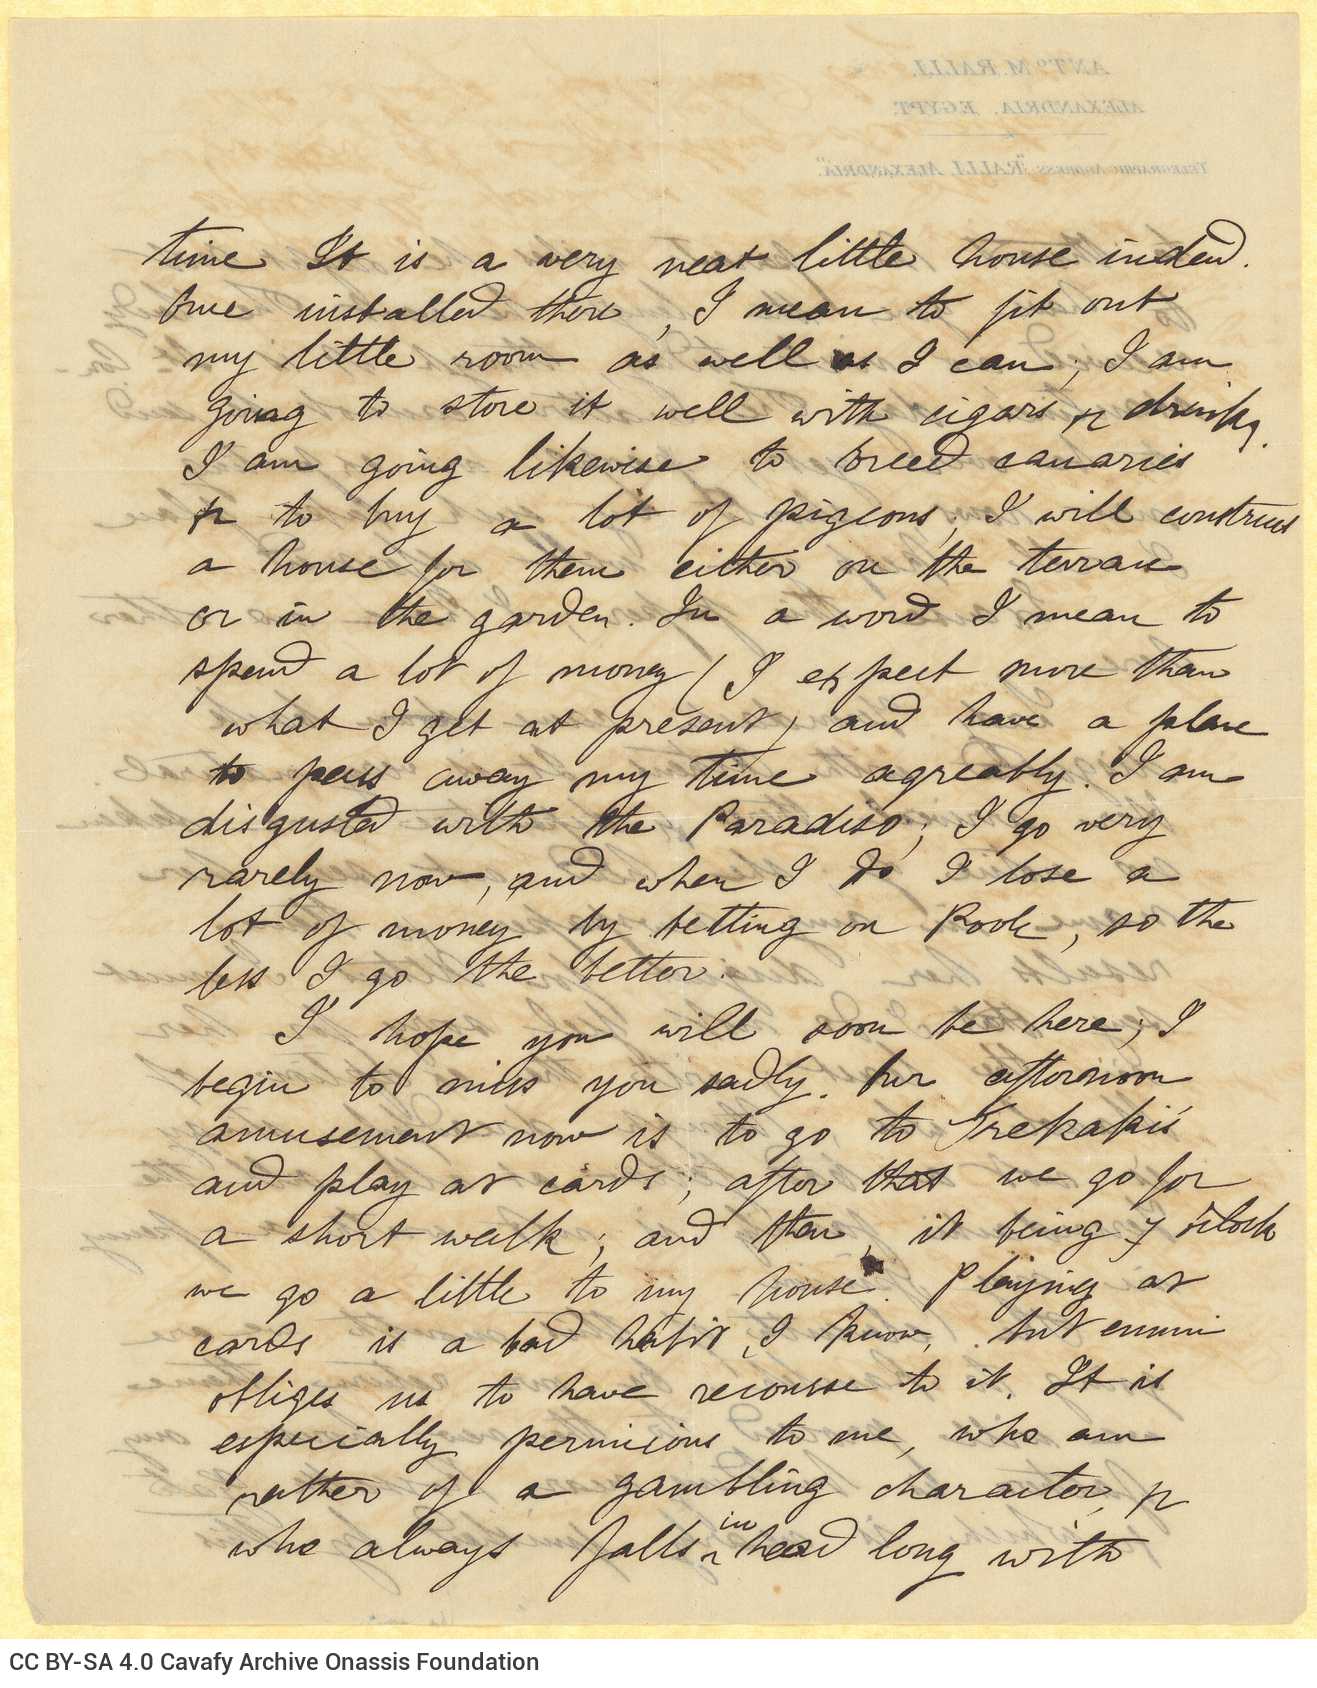 Handwritten letter by Mike Ralli to Cavafy in a bifolio and two sheets, with notes on all sides. Extensive commentary on peop